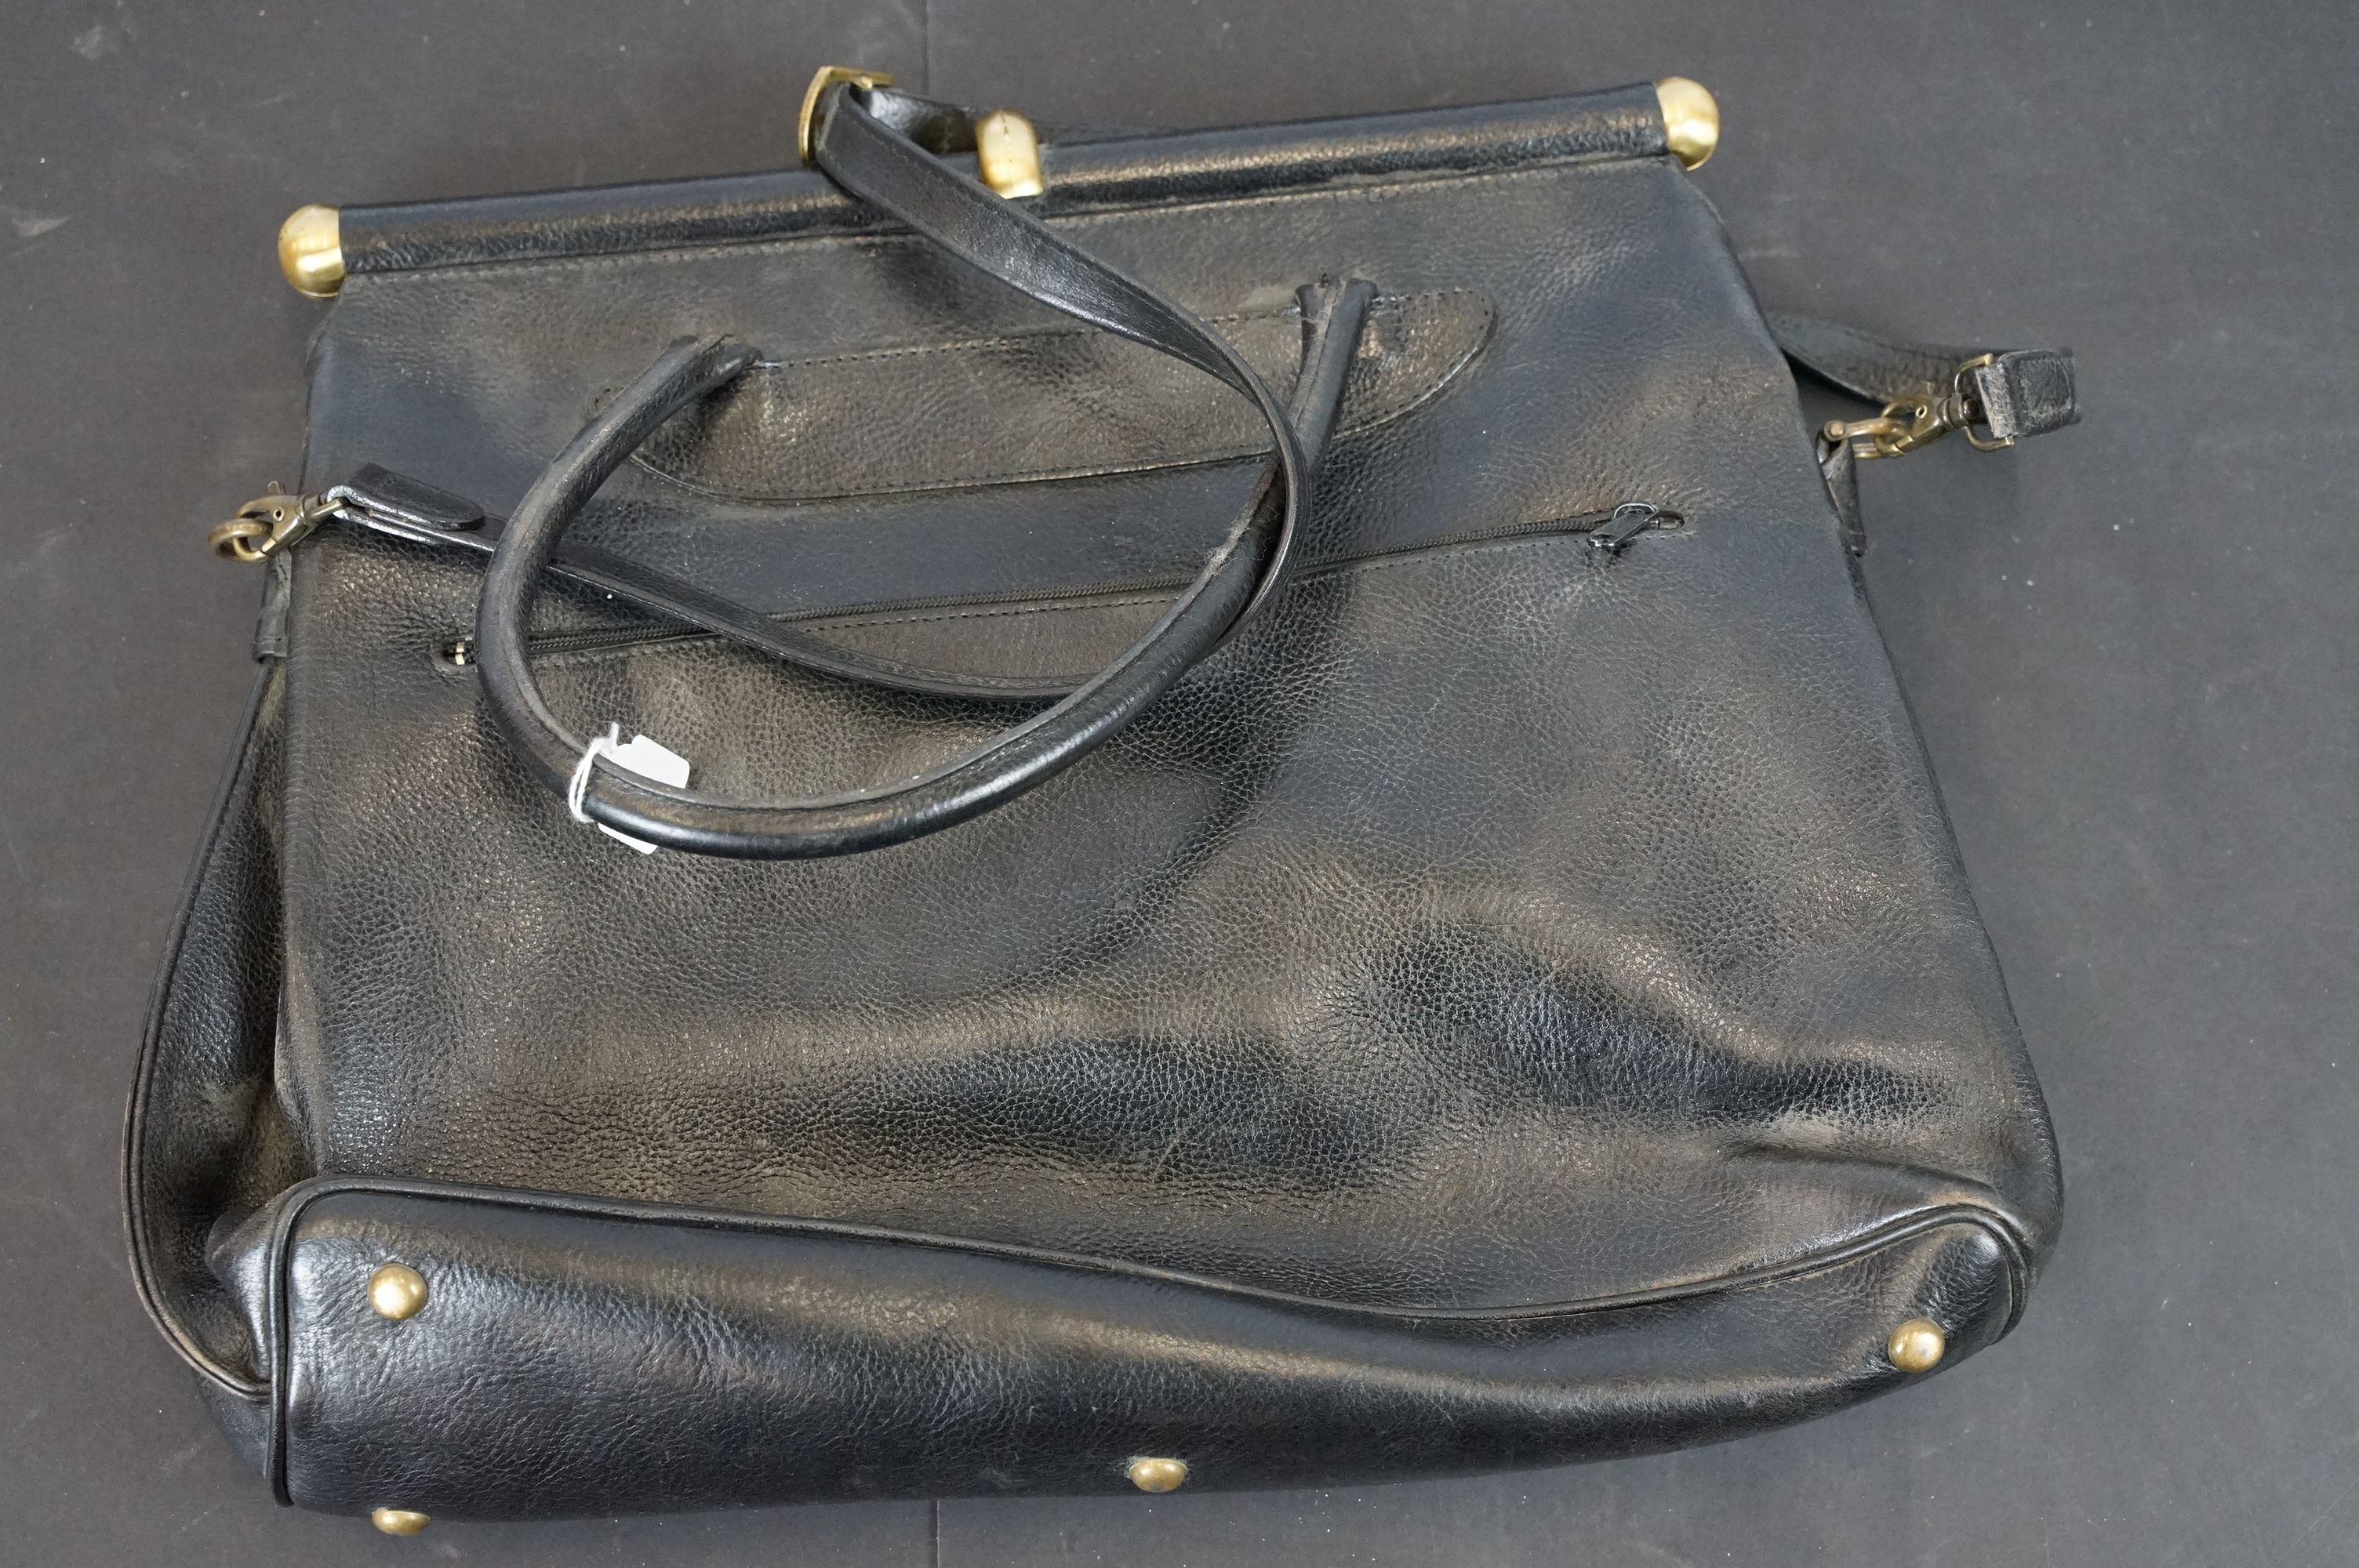 Longchamp holdall bag with tanned leather handles together with a Gianni Conti black leather - Image 14 of 17